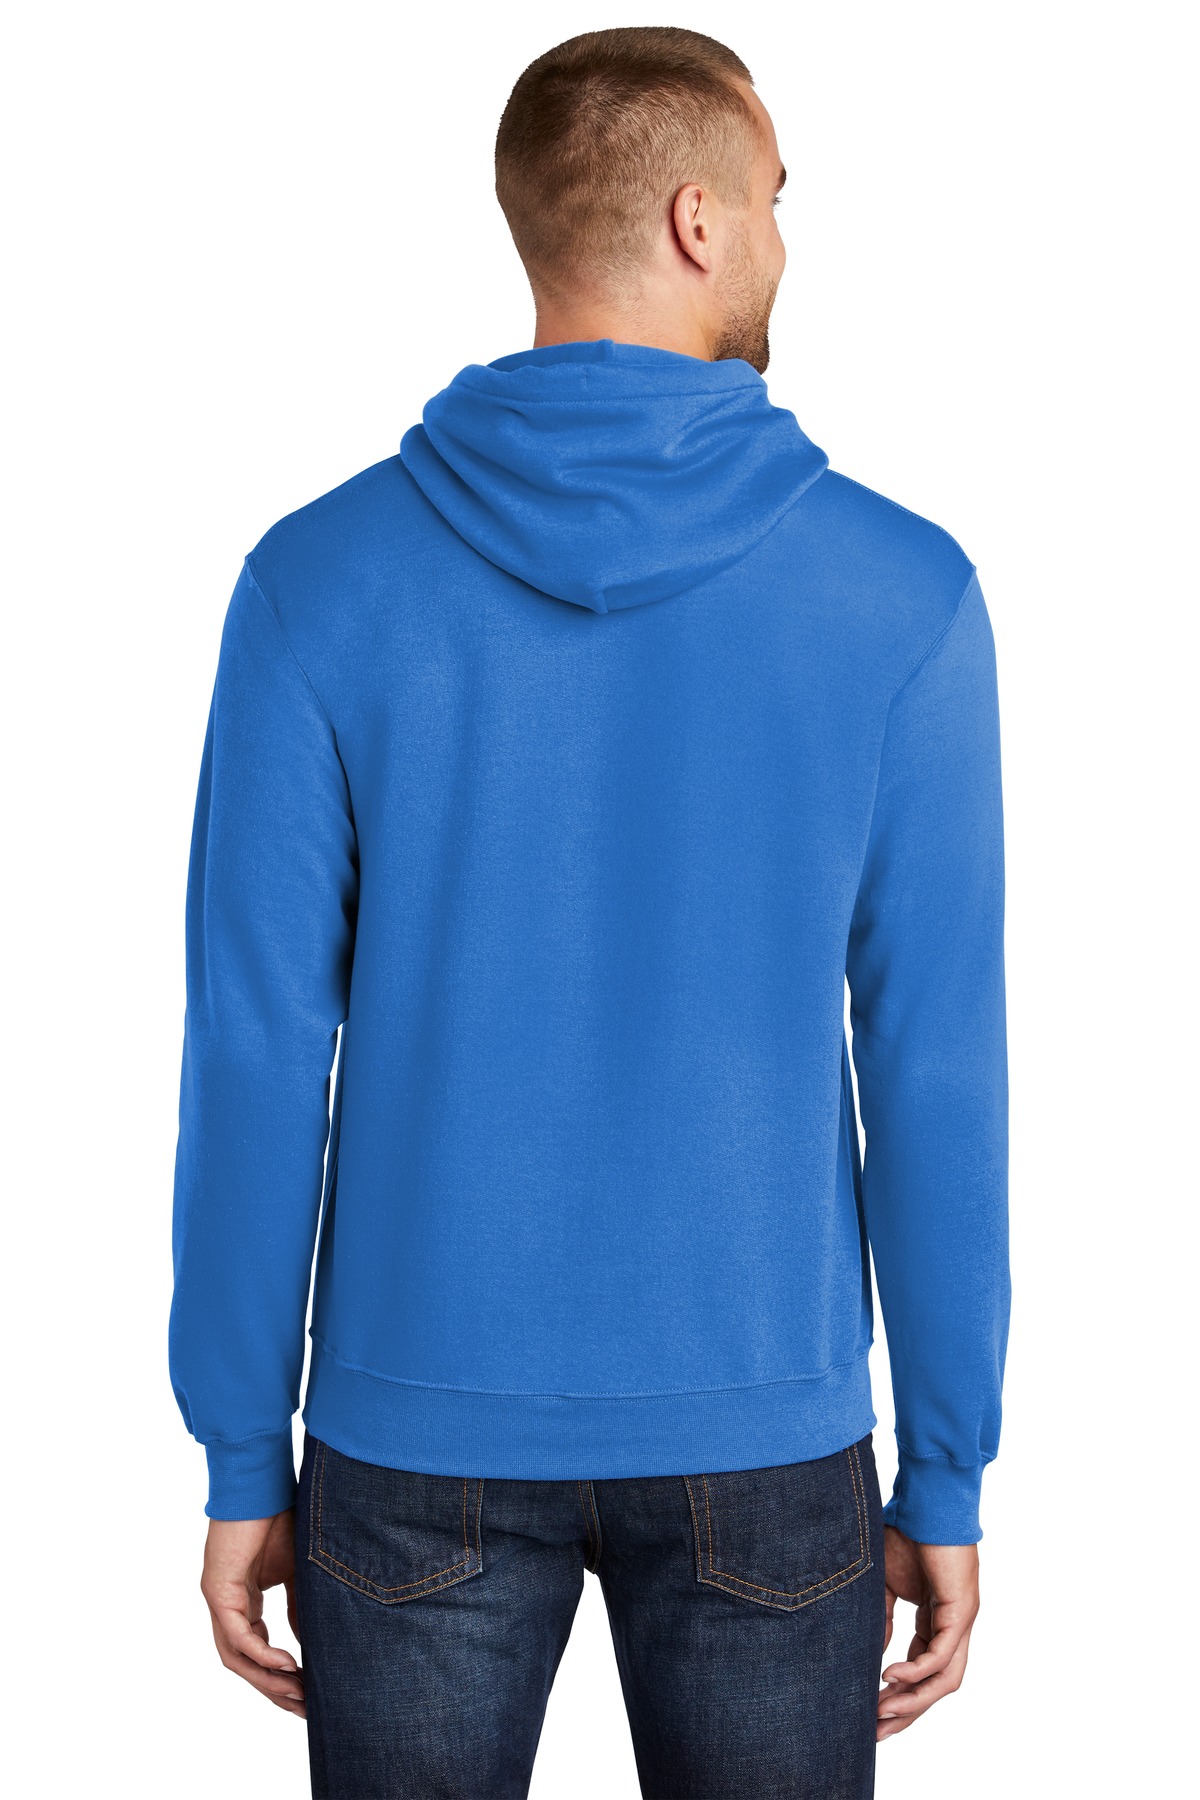 Port & Company Pc78 Ht Unisex Tall Core Fleece Pullover Hooded